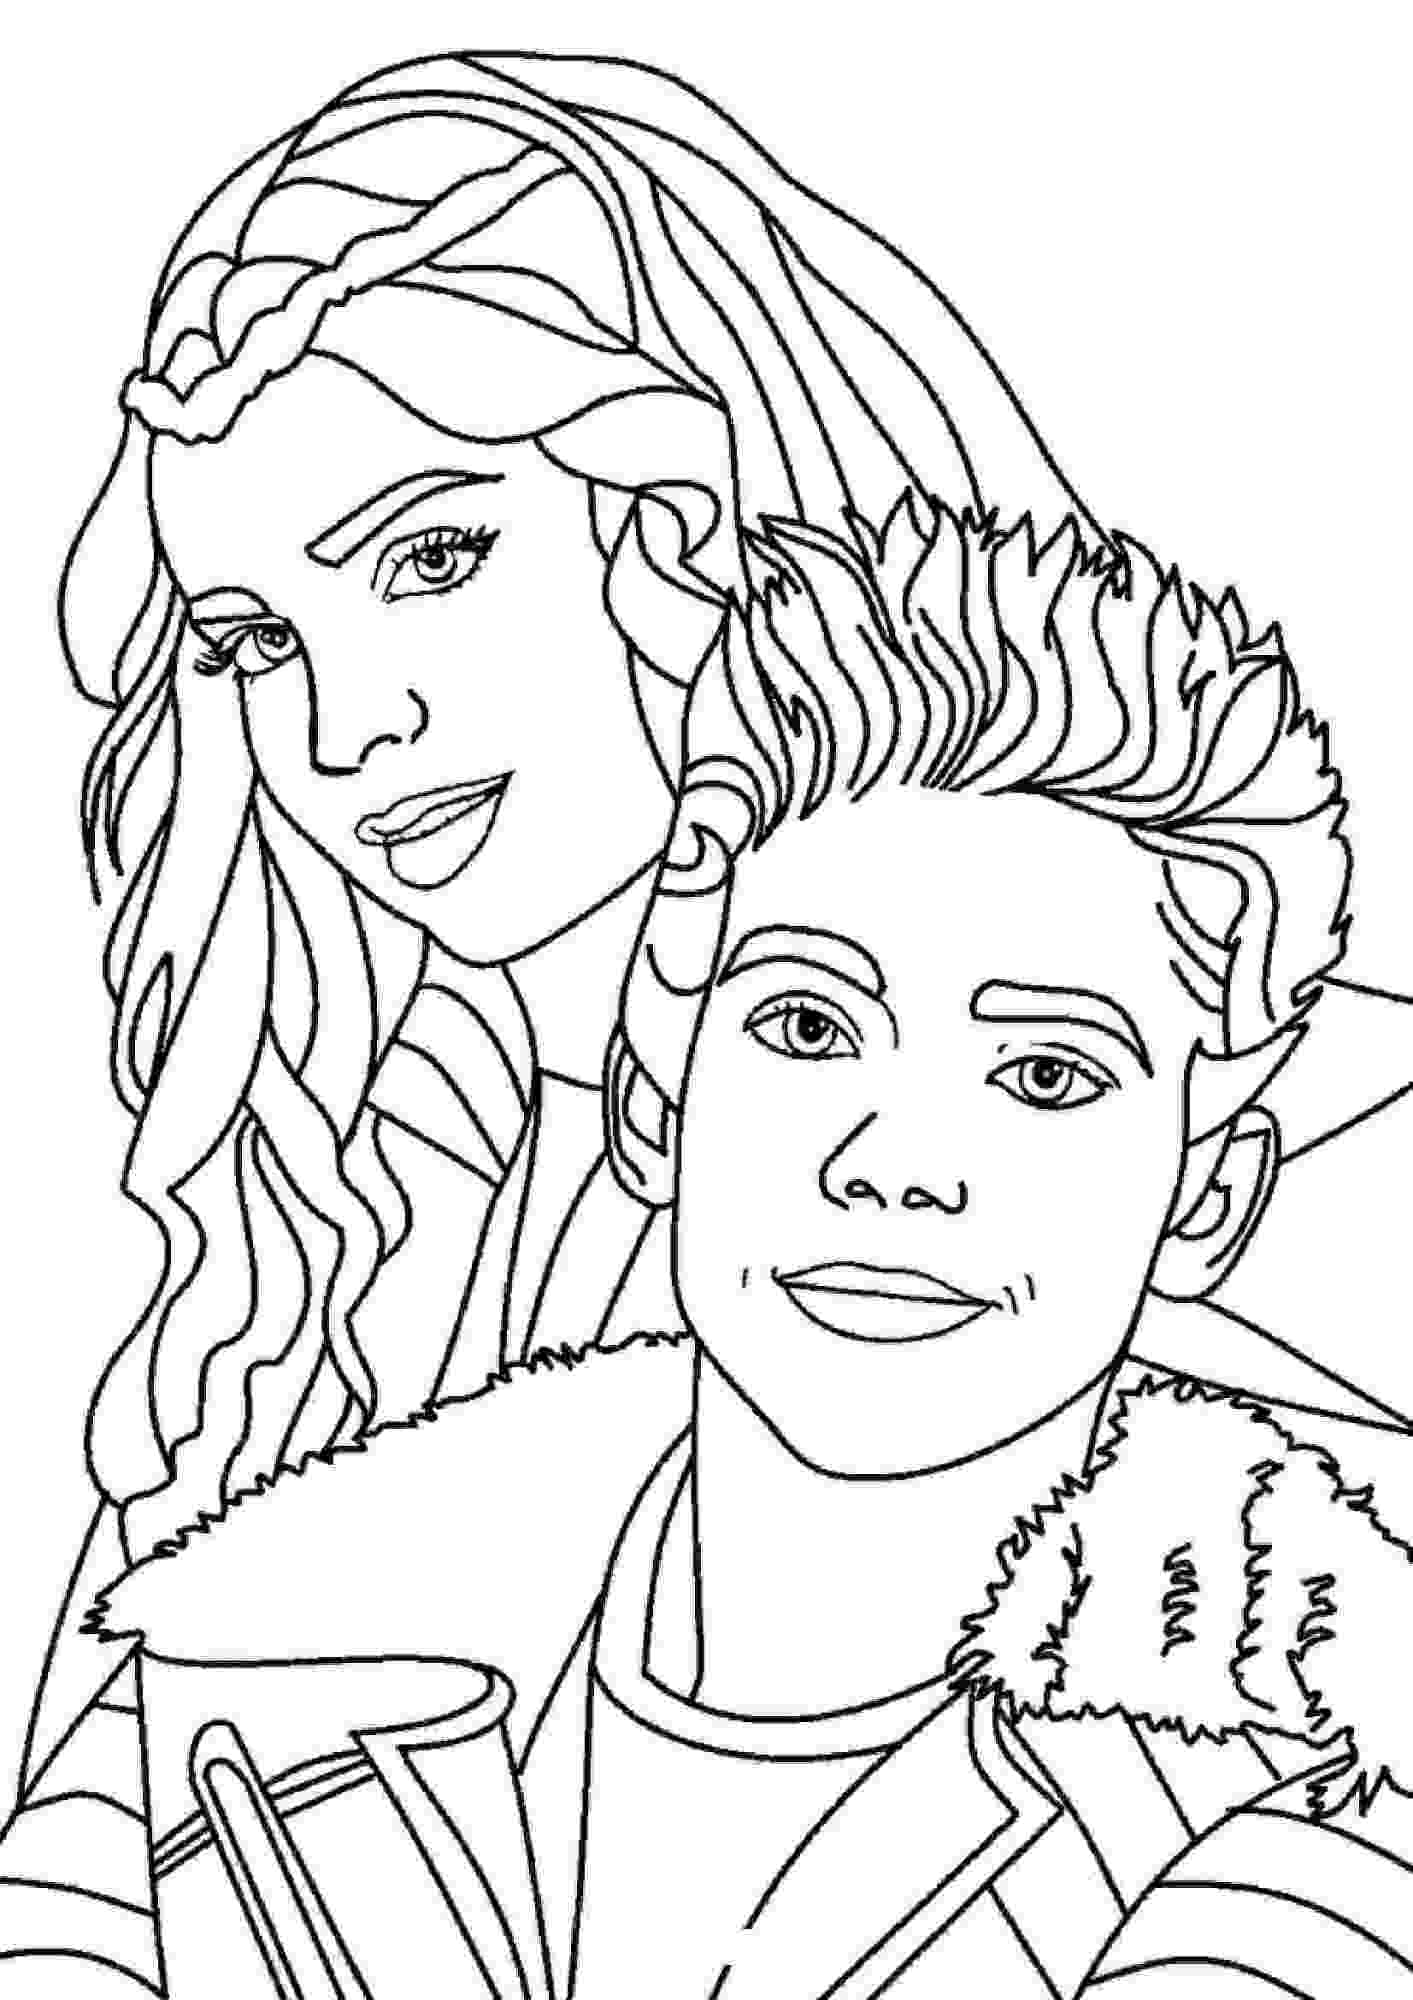 Evie and Carlos play together from Descendants Coloring Pages